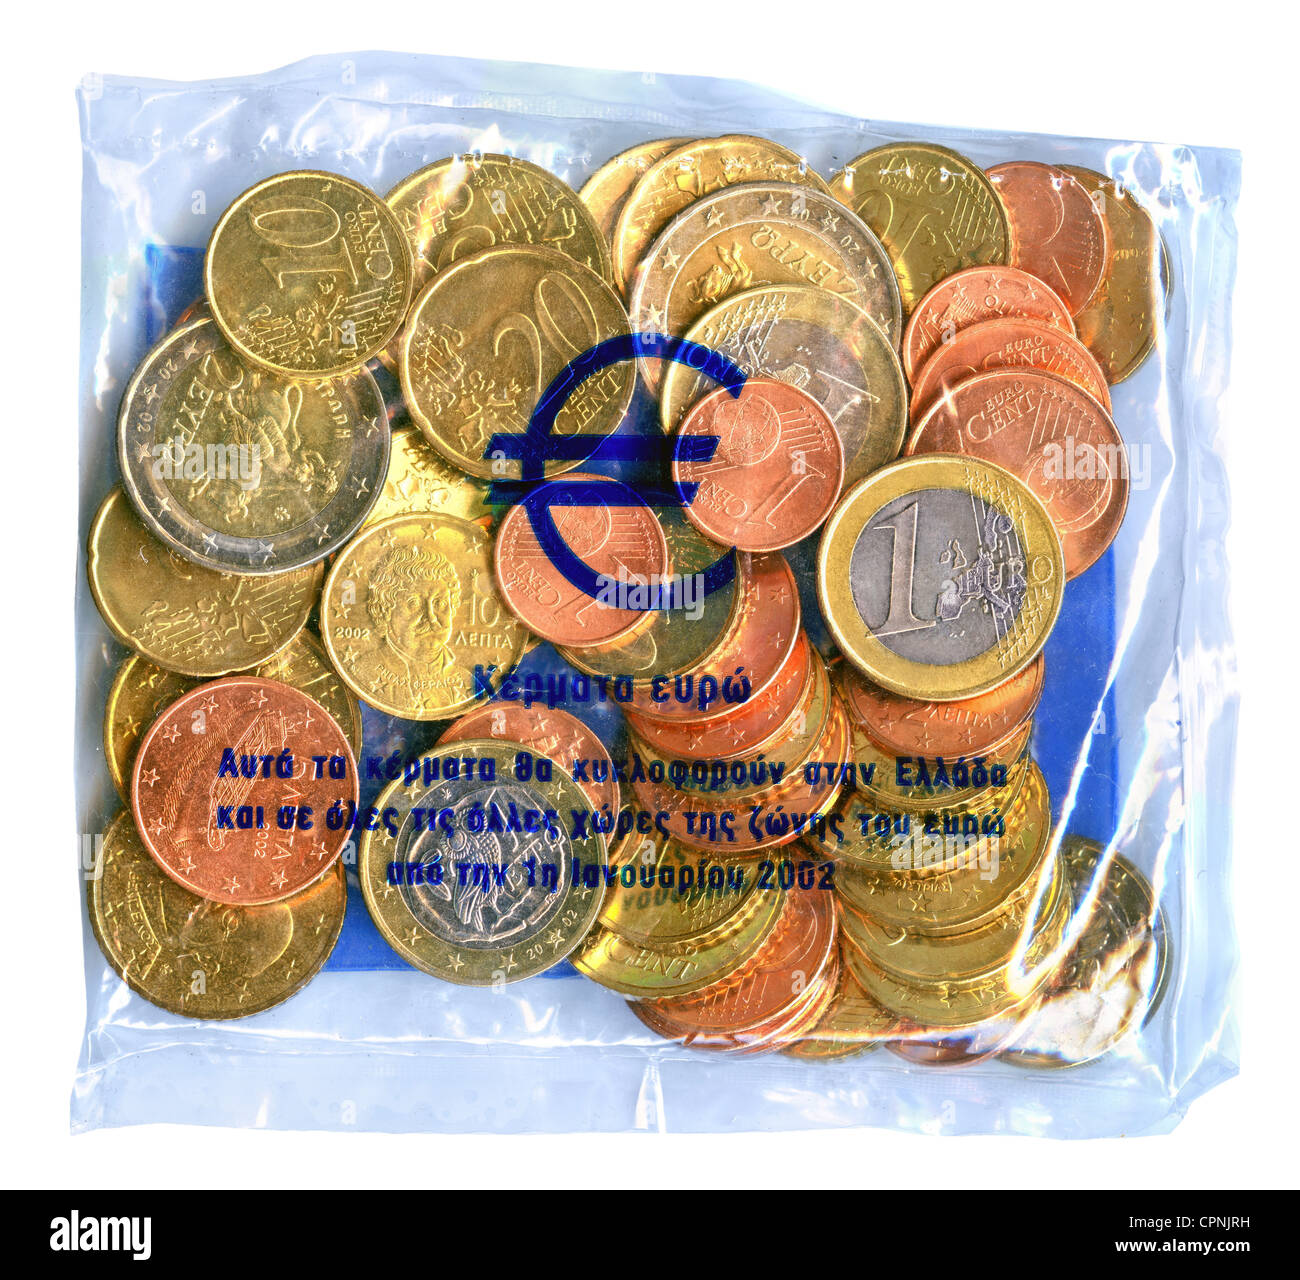 money / finances,coins,Greece,Euro Starterkit Greece,starter kit launched by the banks in the December 2001,January 2002 emitted for 5000 drachma to private customers,2002,euro coins,cents,euros,in the nominal value of 14.67 euro,cent coin,currency conversion,currency exchange,Greek,Grecian,symbol,symbols,symbol image,symbolism,imageries,symbolic,symbolical,euro launch,launch,start,Eurostar,euro price,member,members,euro zone,euro crisis,economic crisis,economic crunch,economic crises,economic crunches,cash,European,Europe,,Additional-Rights-Clearences-Not Available Stock Photo